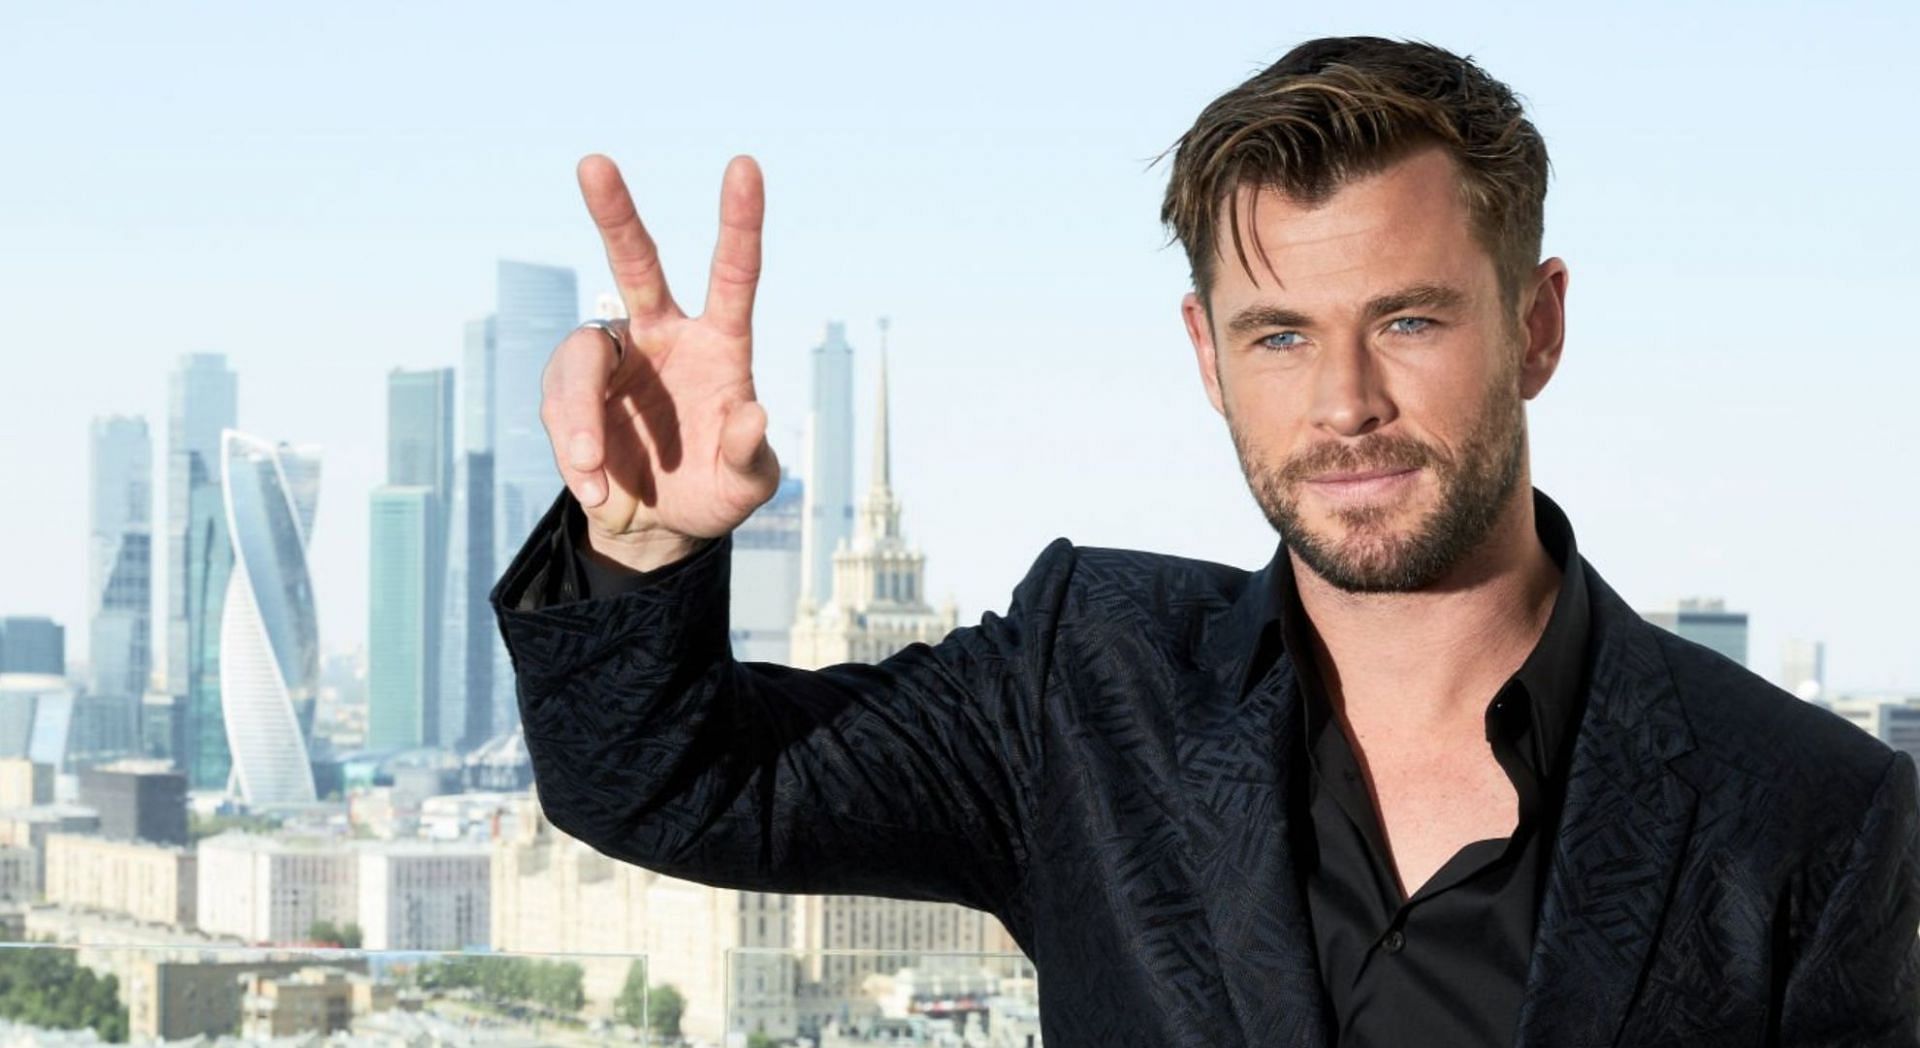 Chris Hemsworth is taking a break from acting following a genetic predisposition health test (Image via Getty Images)